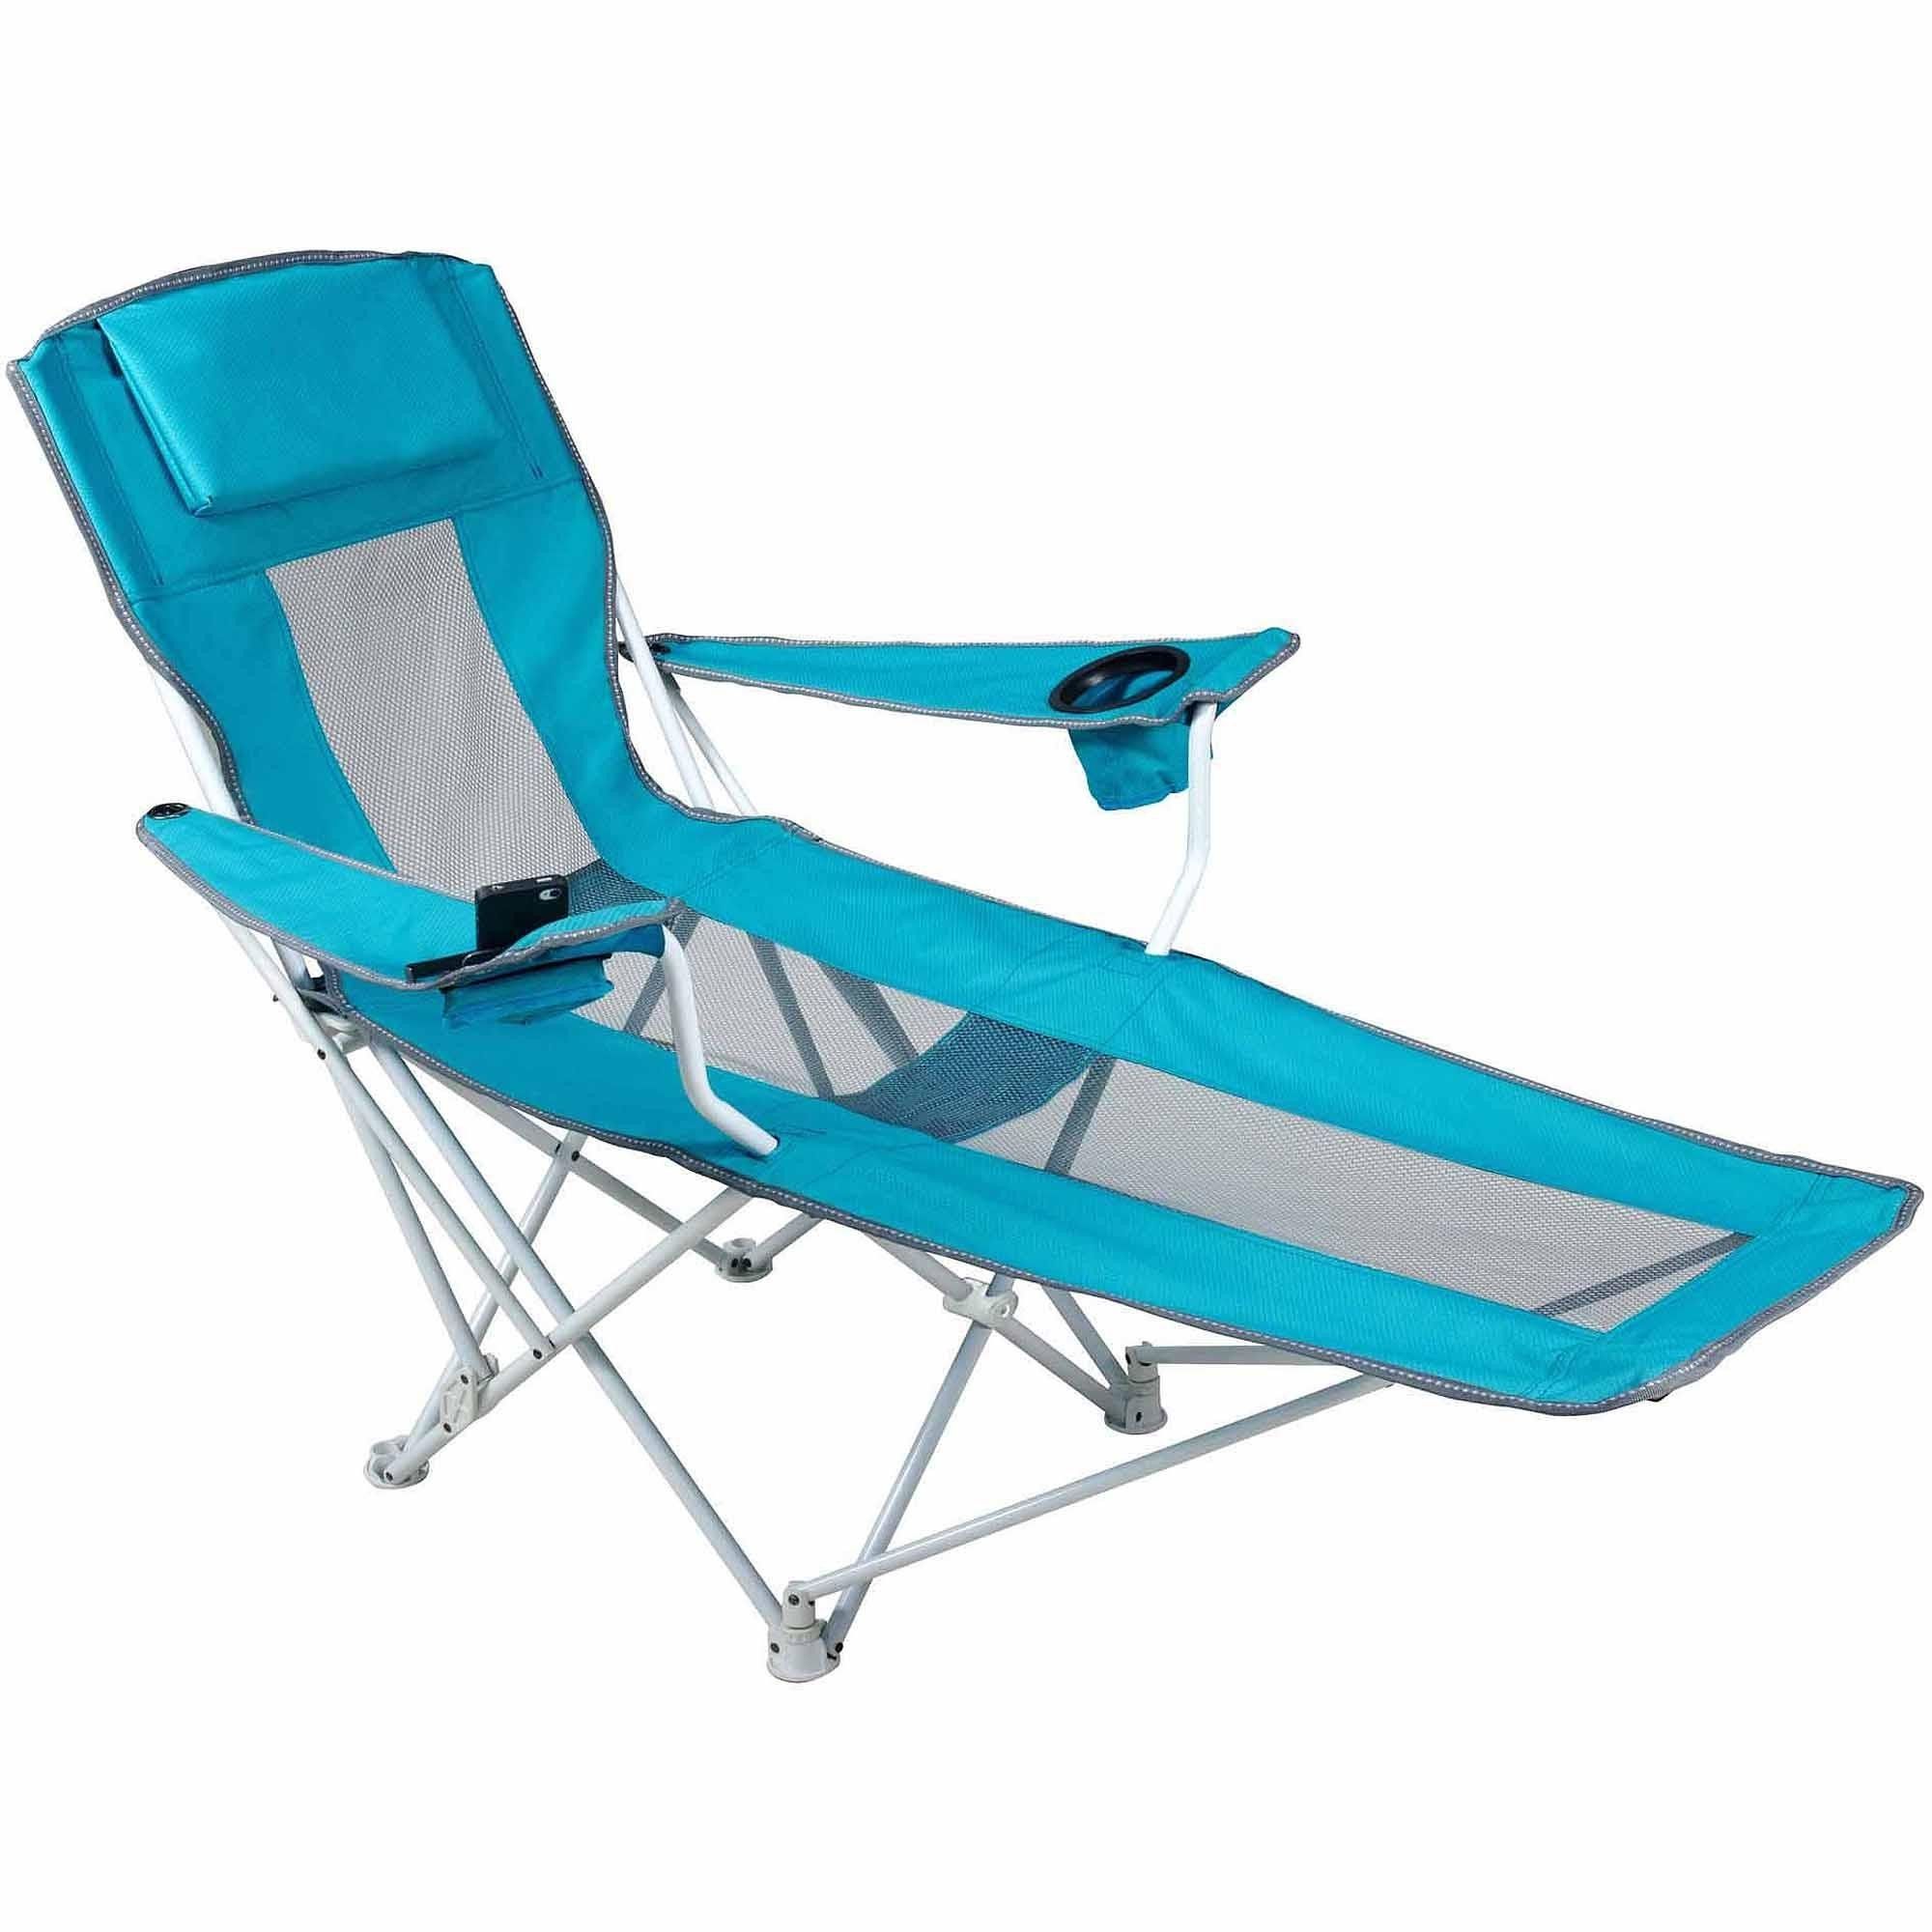 Lounge Chair : Chaise Lounge Plastic Pool Chaise Lounge Chairs With Favorite Folding Chaise Lounge Chairs For Outdoor (View 14 of 15)